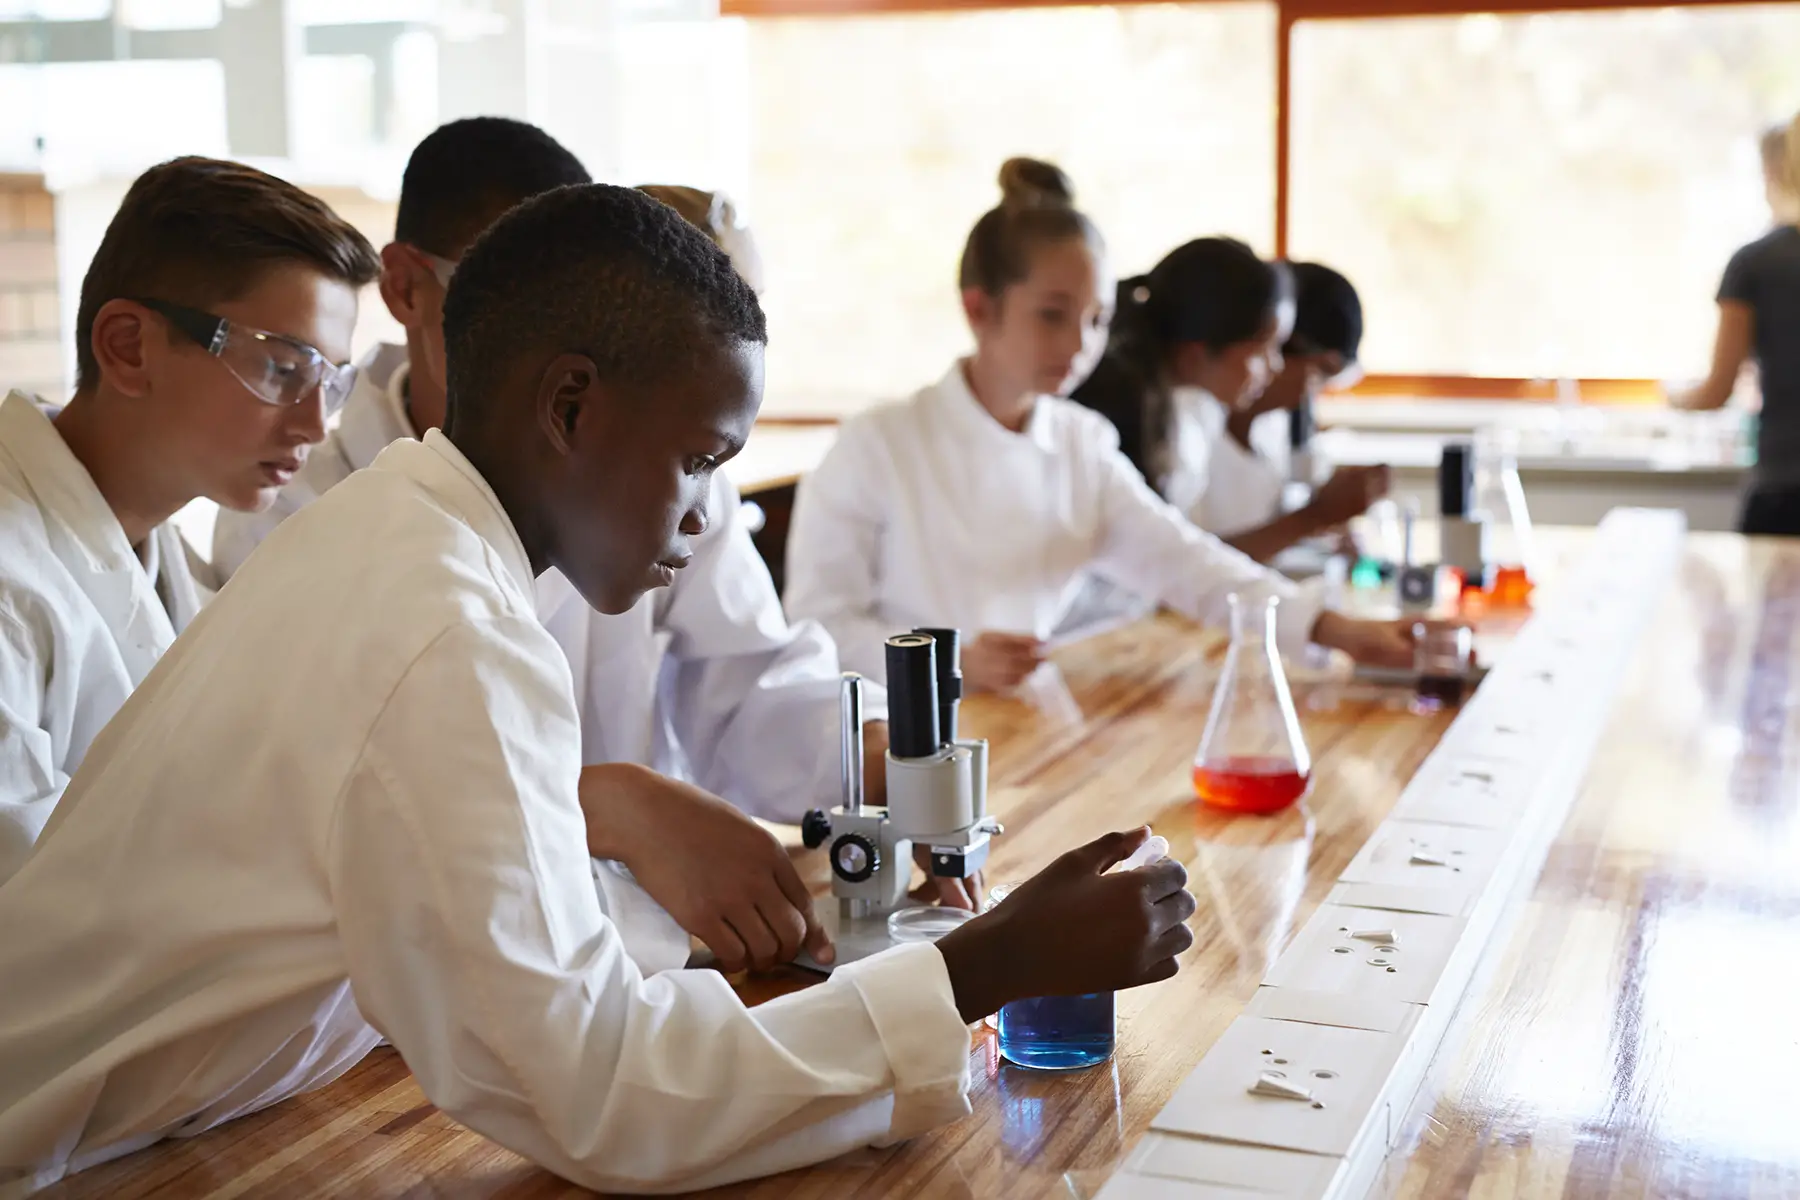 Students in lab coats working on experiments in the secondary school science lab